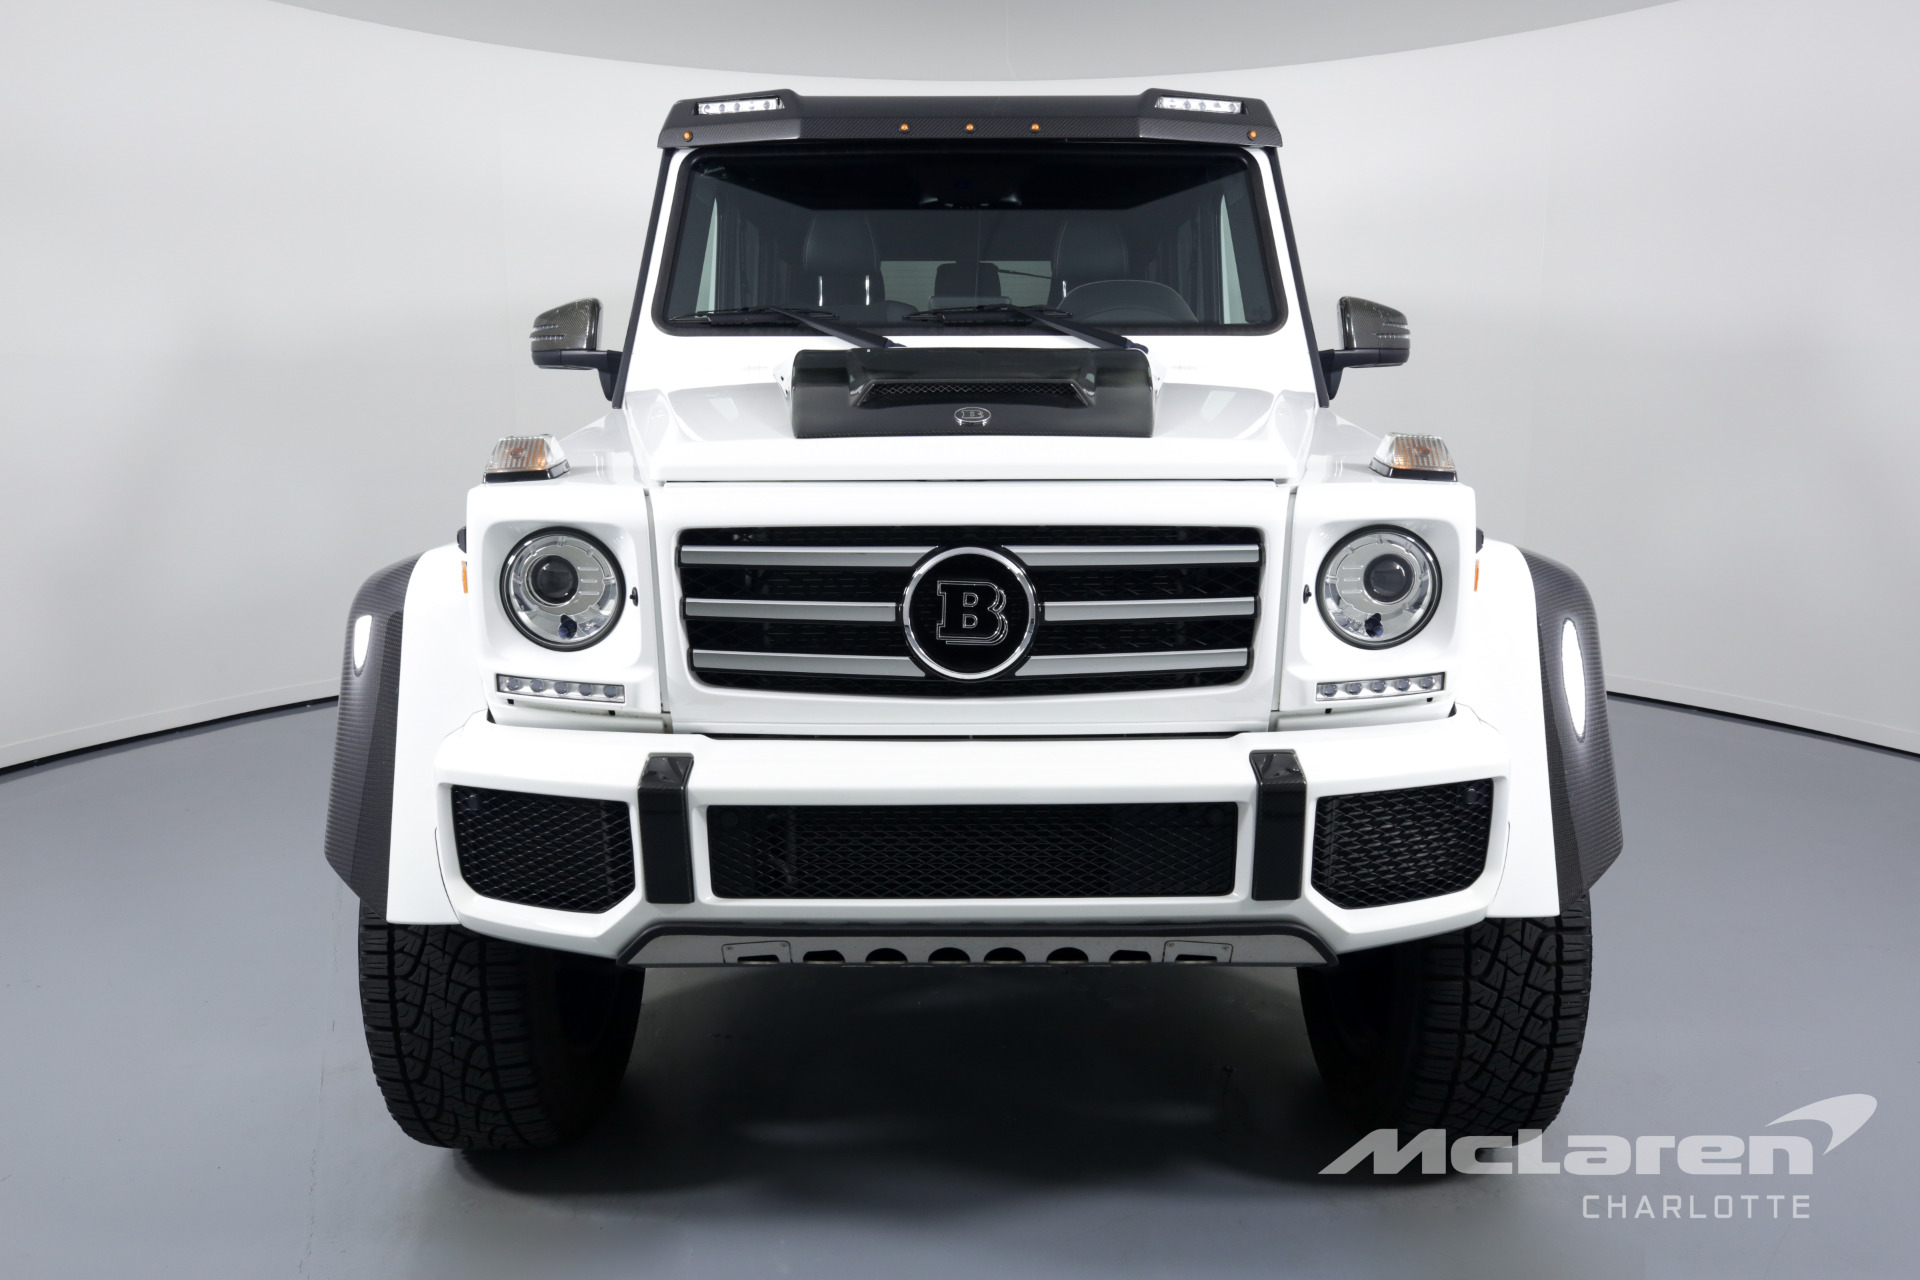 Used 18 Mercedes Benz G Class G 550 4x4 Squared For Sale Special Pricing Mclaren Charlotte Stock